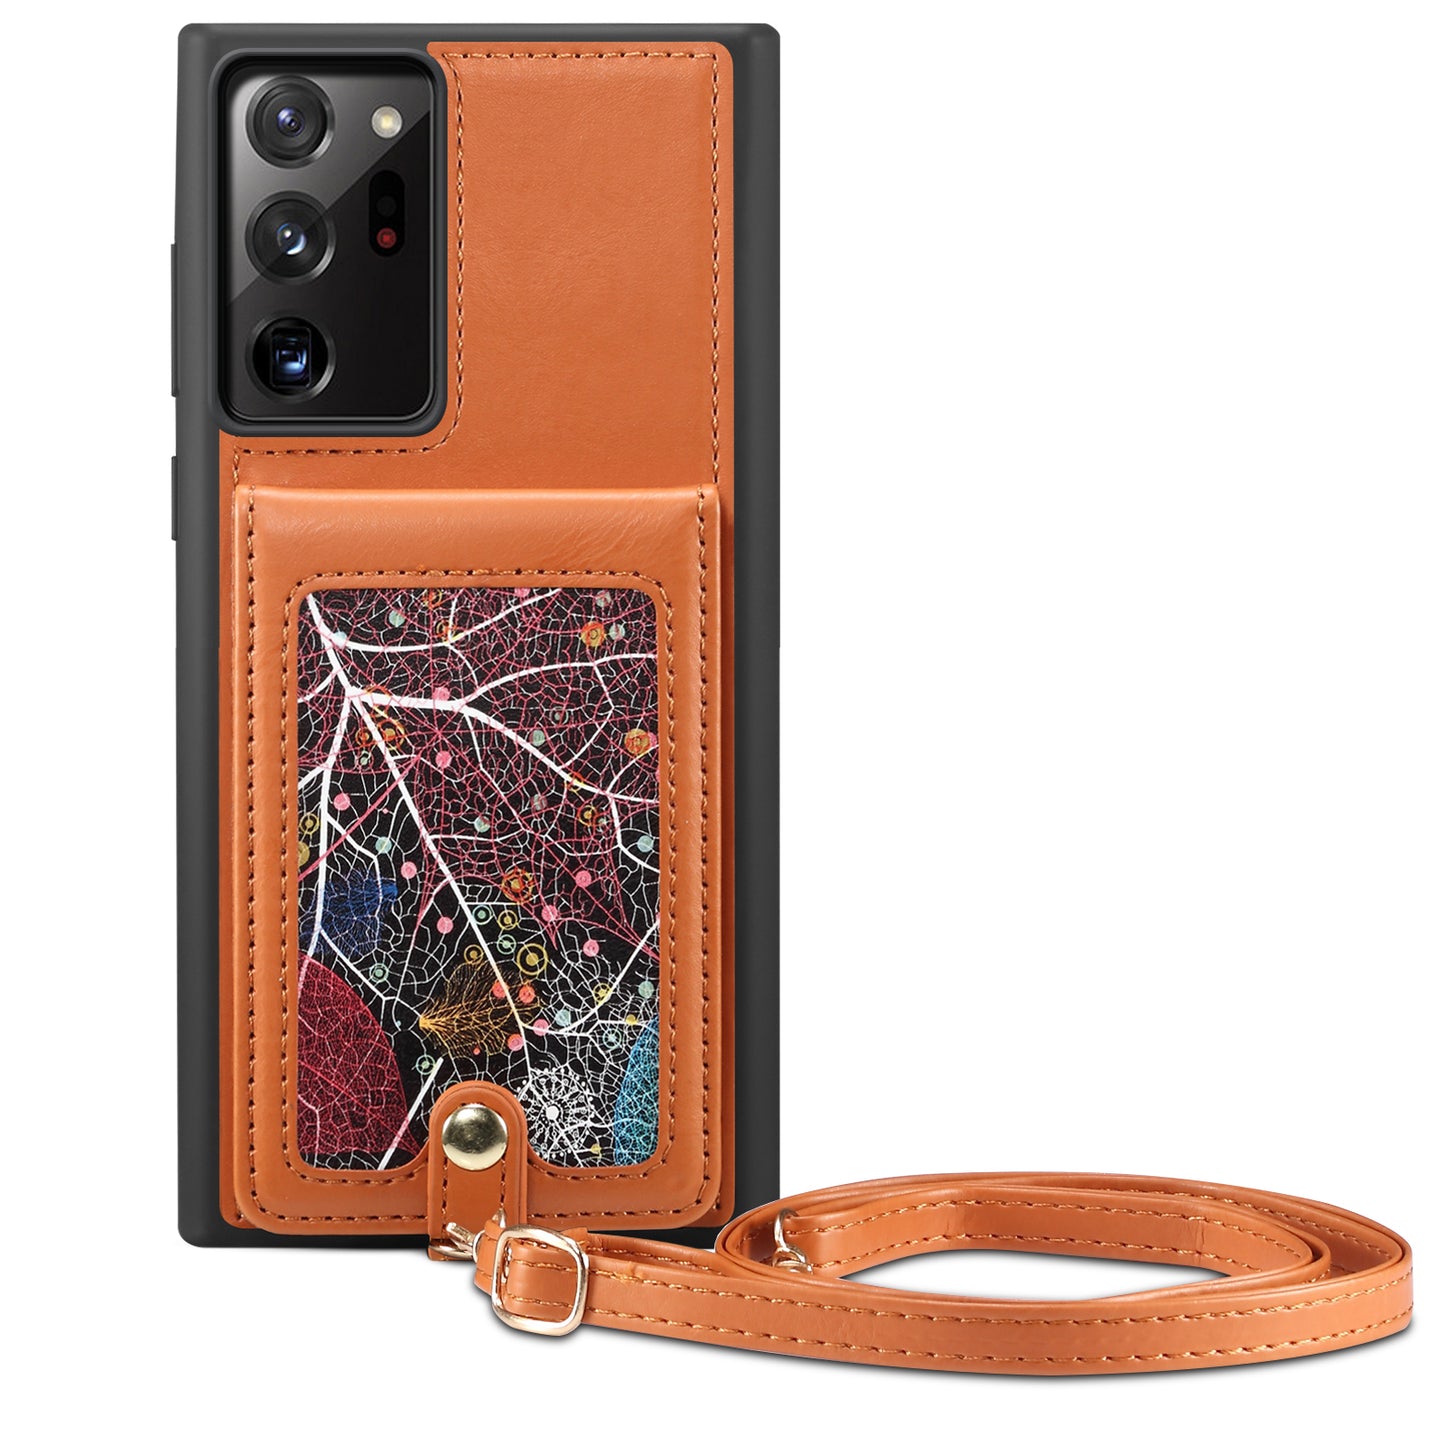 Interstellar Expanse Galaxy Note20 Ultra Leather Cover Flip Wallet Stand with Shoulder Strap